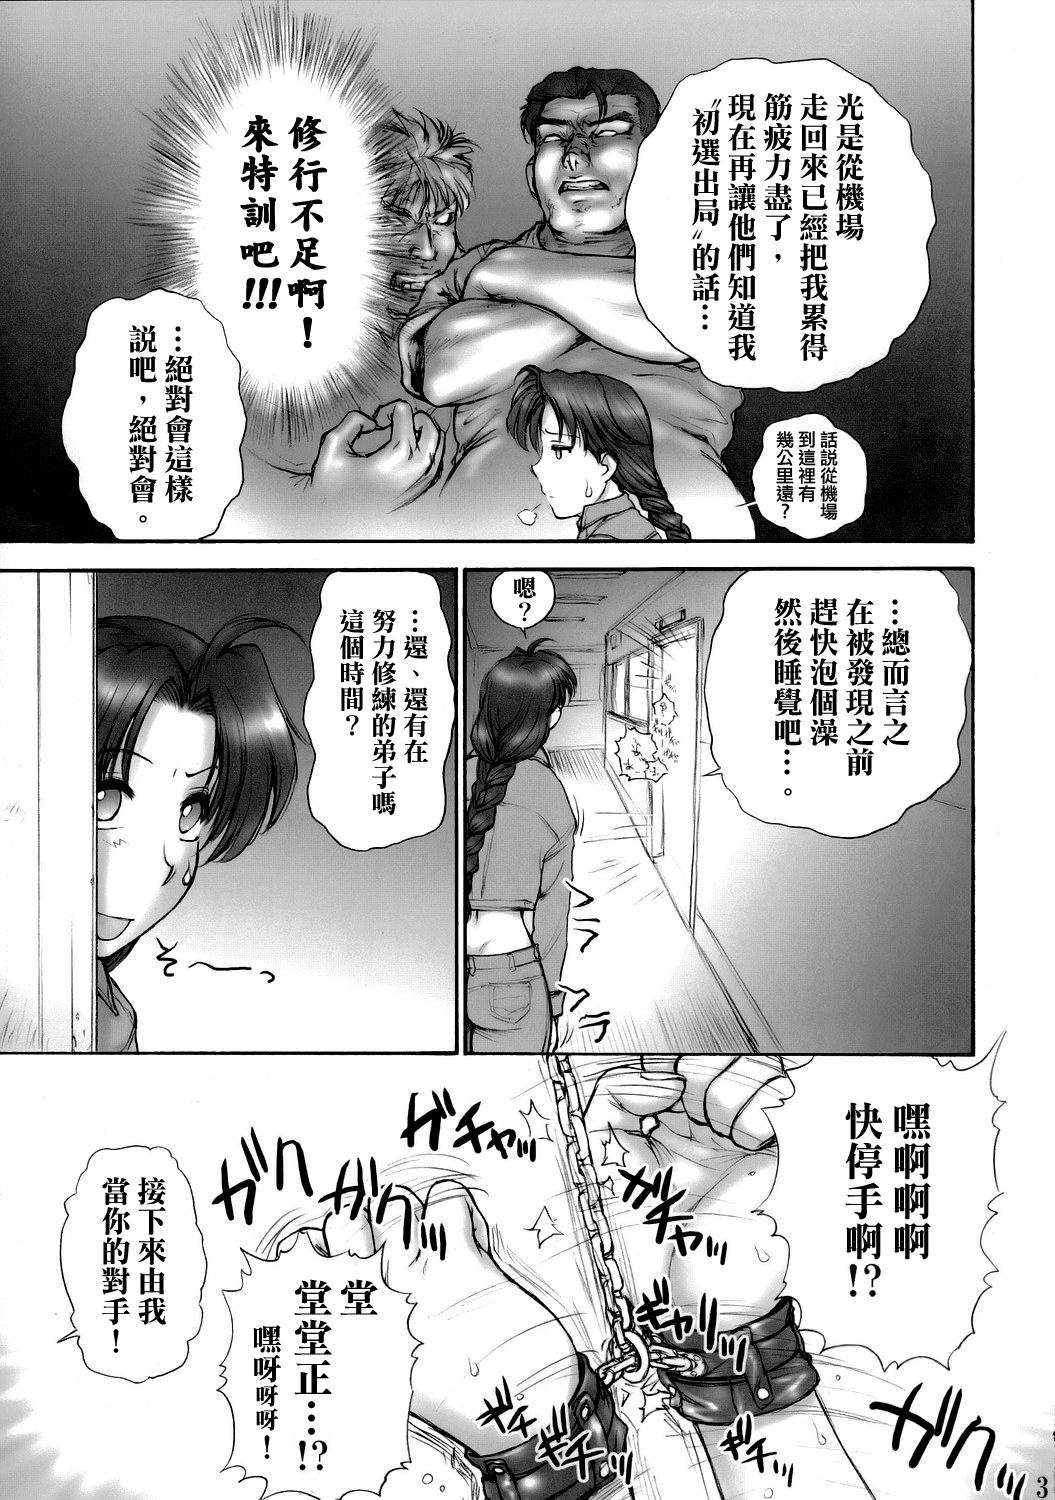 Gay Pornstar (SC29) [Shinnihon Pepsitou (St. Germain-sal)] Report Concerning Kyoku-gen-ryuu (The King of Fighters) [Chinese] [日祈漢化] - King of fighters Massage Creep - Page 5